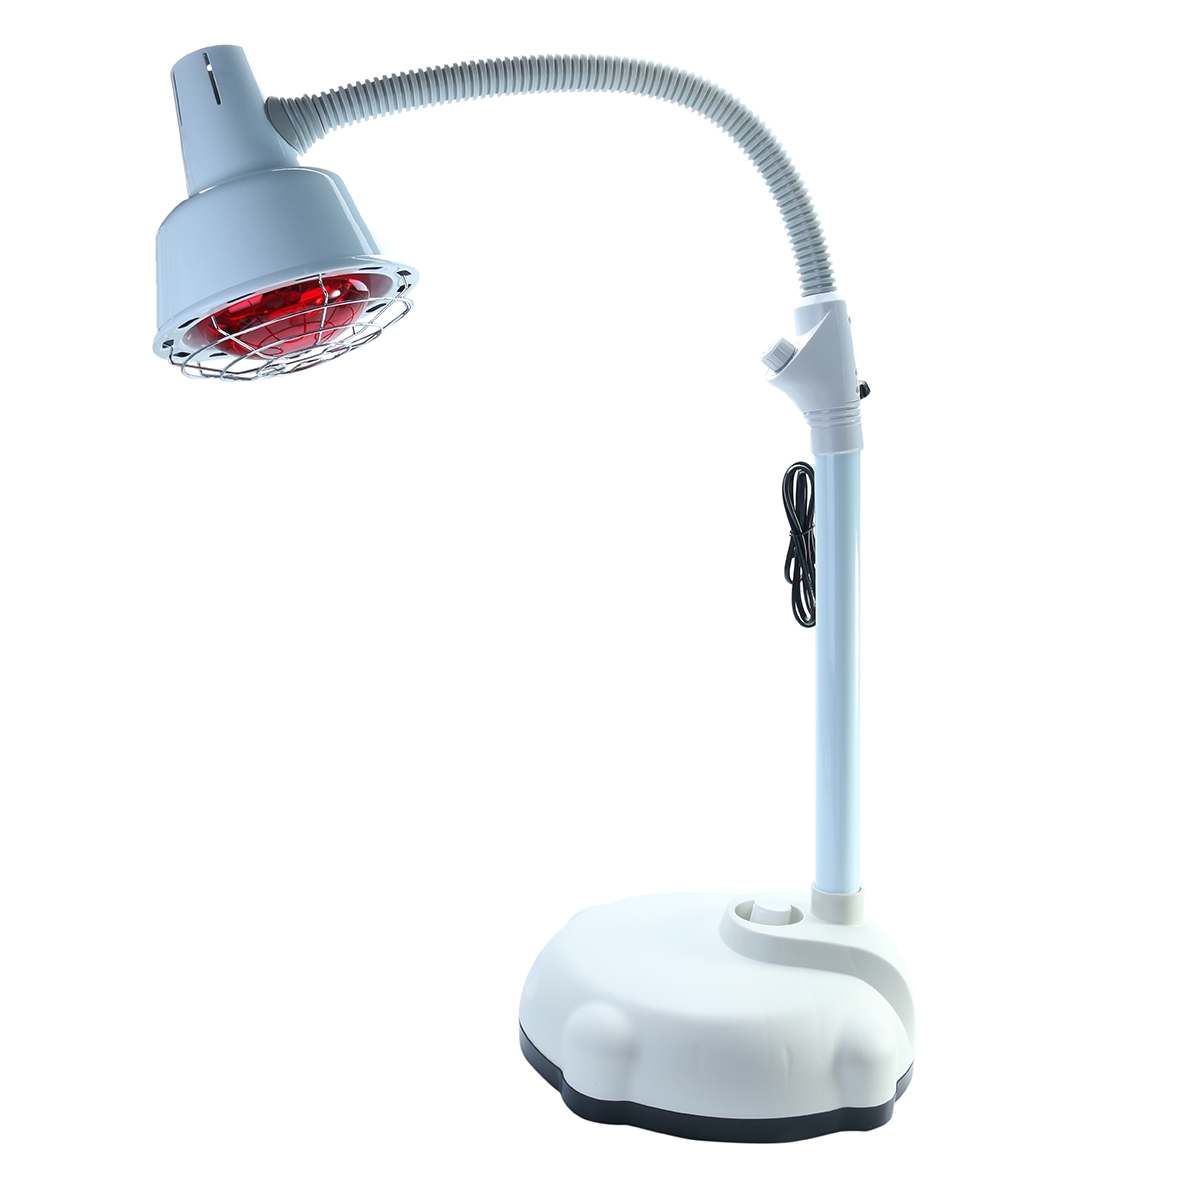 Salon Heat Lamp 275w Infrared therapy Tdp Infrared Ir Temperature Heat Lamp Health